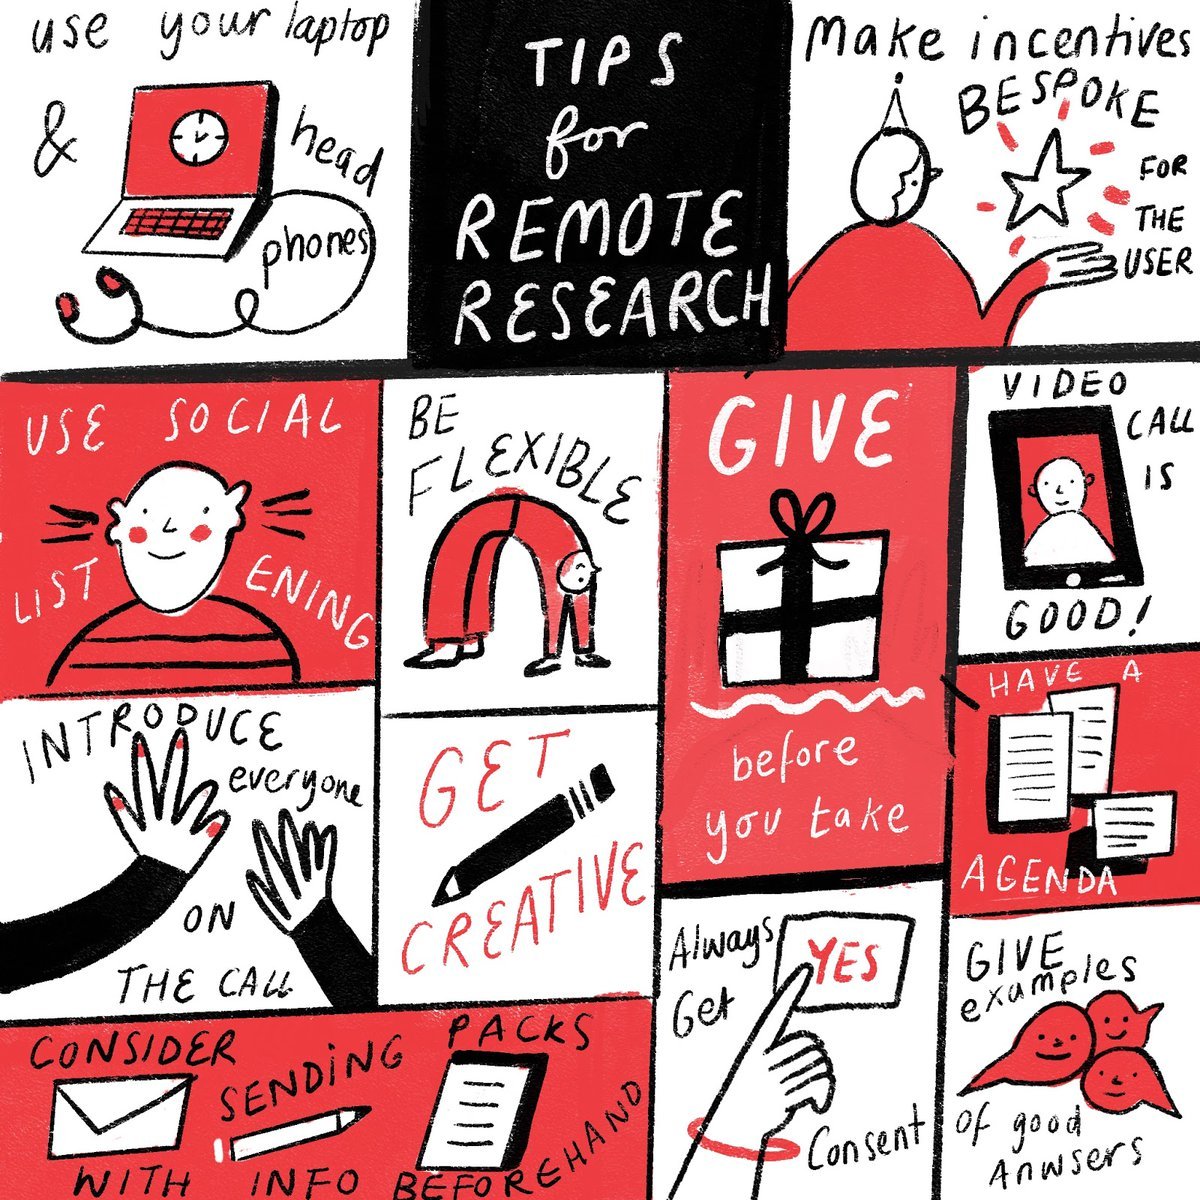 THREAD: Today I've gathered methods and advice for remote exploratory and generative qualitative research that is not workshops. First one is from  @wearesnook, illustrated by  @isabellabunnell. I first saw it via  @LMWScopro.